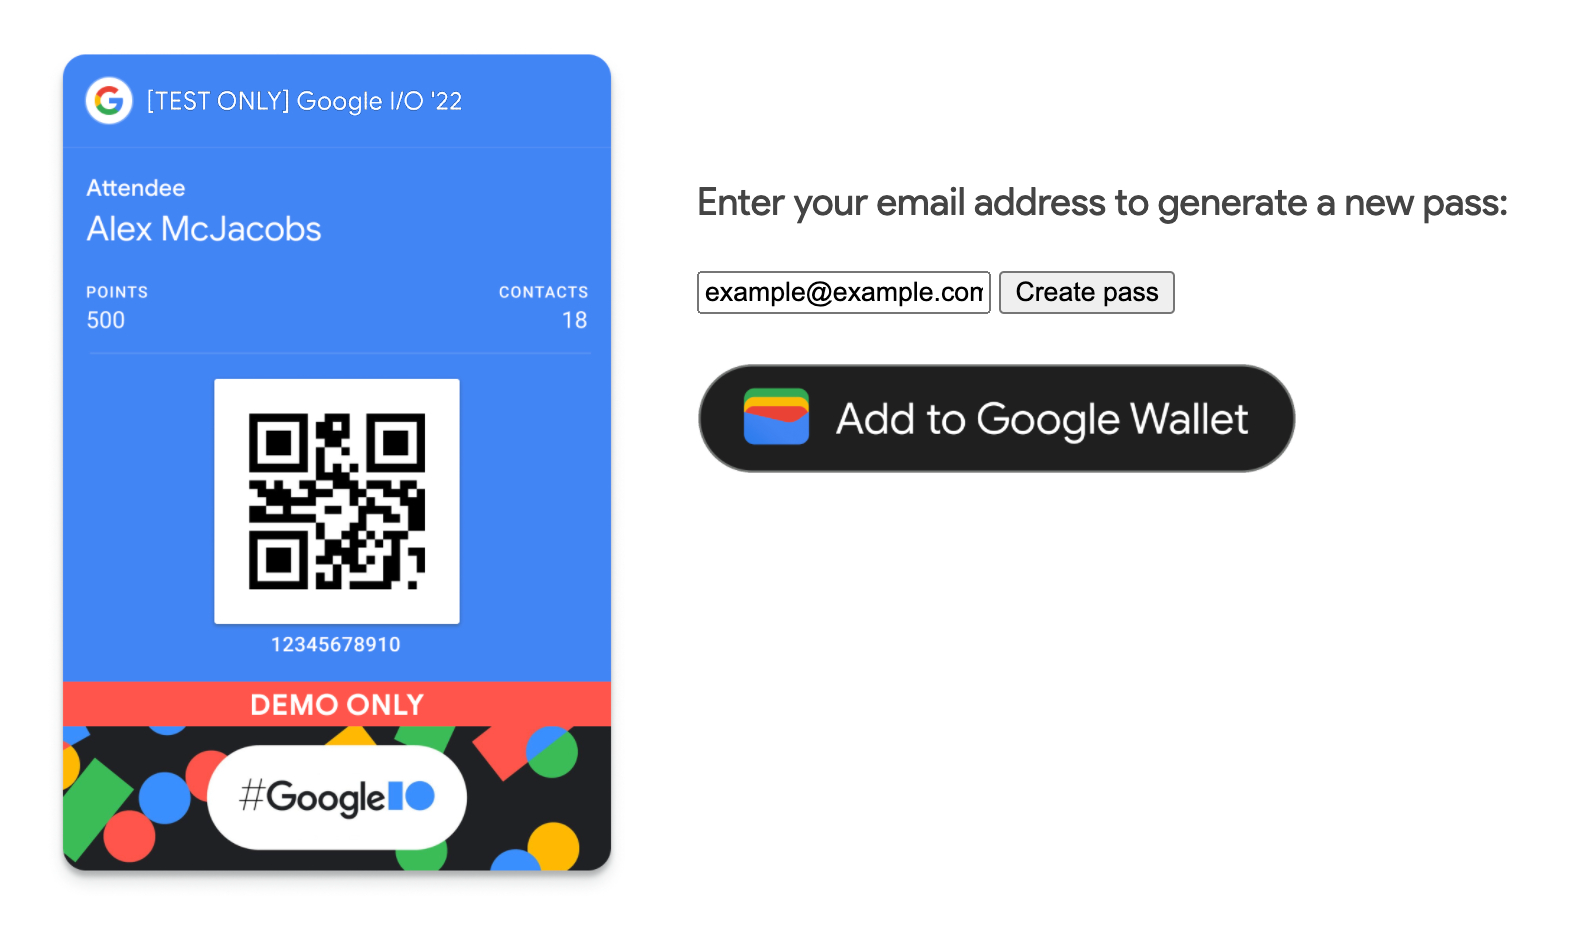 The Add to Google Wallet button is rendered successfully on the app frontend